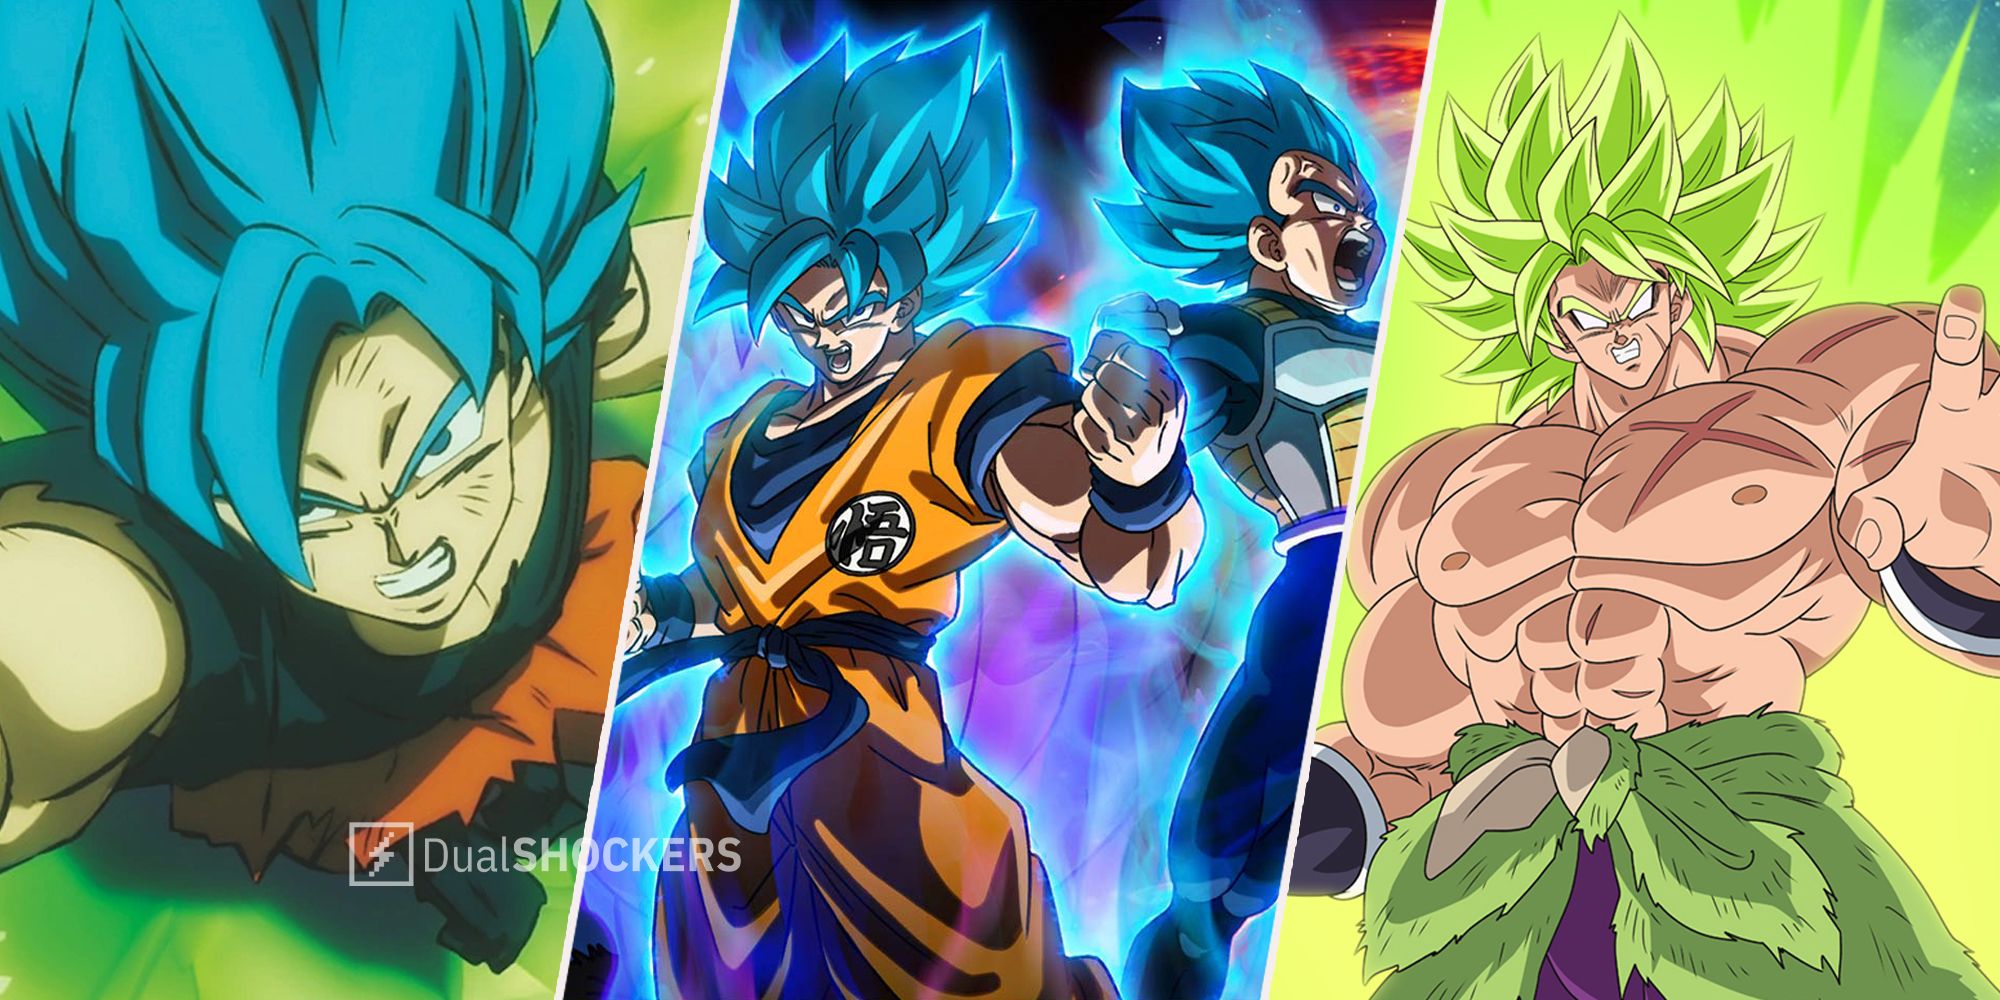  Dragon Ball Super : Broly - The Movie : Various, Various:  Movies & TV